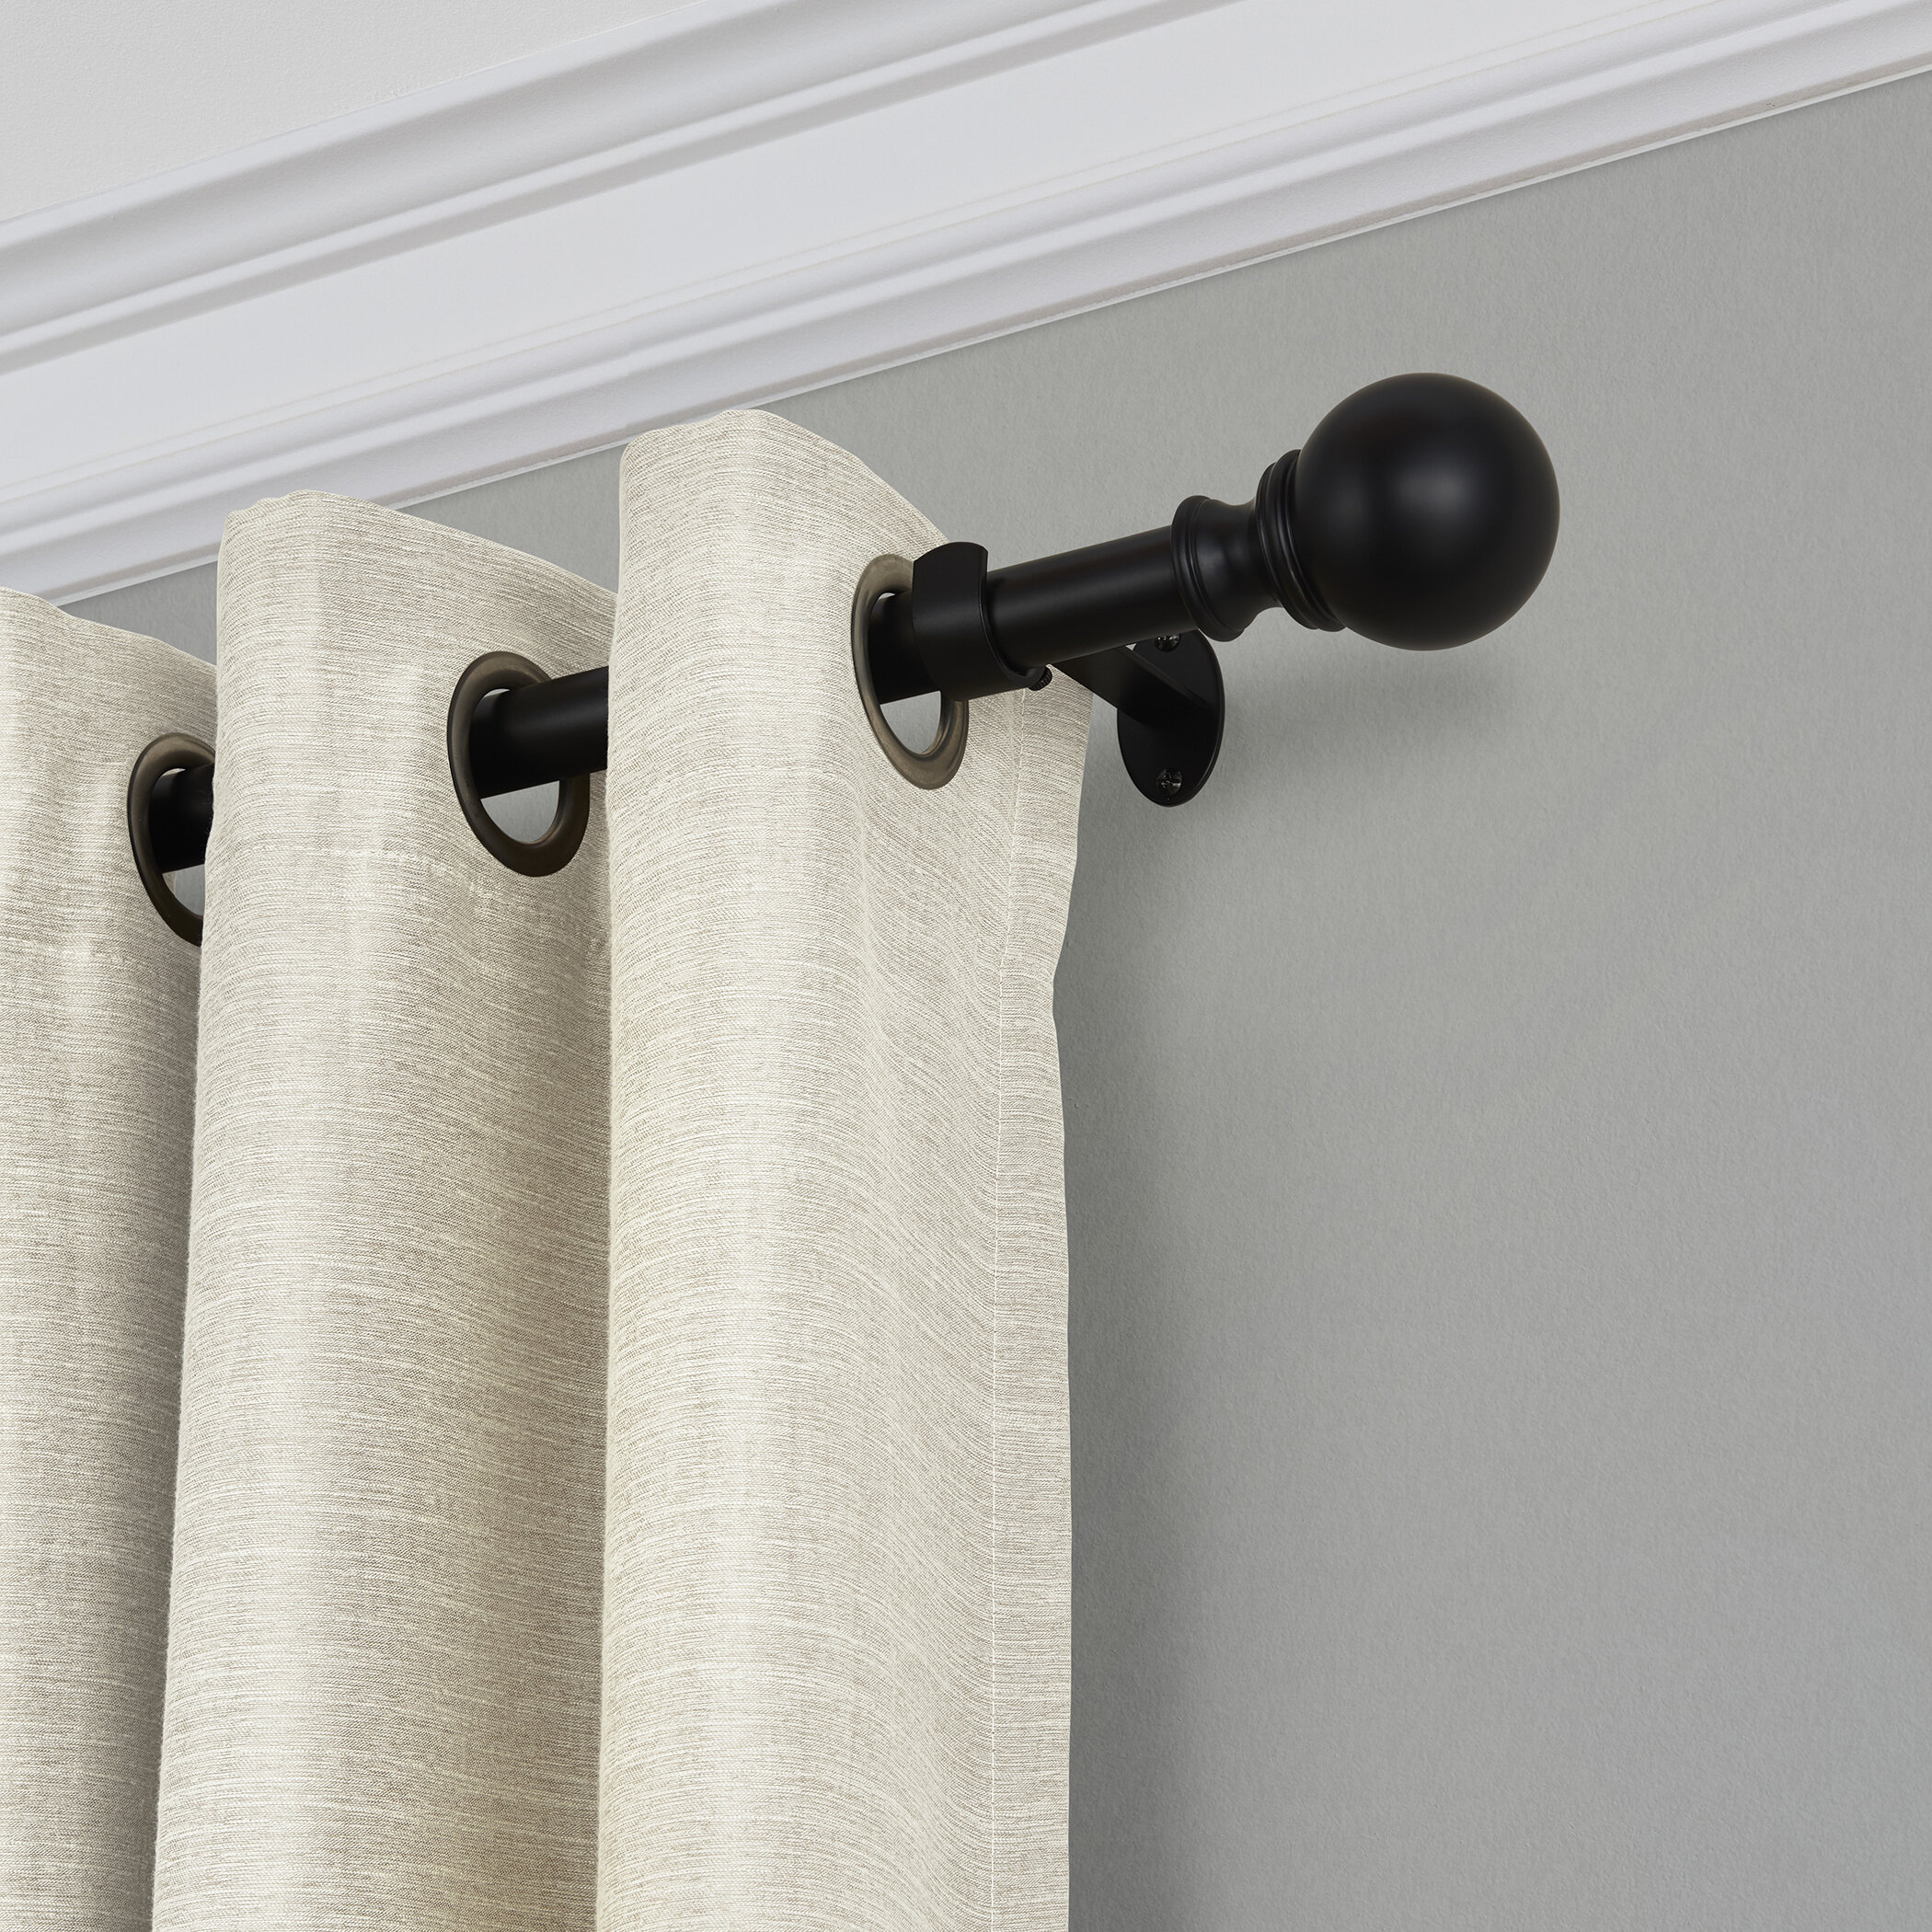 Double Curtain Rod Decorative Traditional Durable Antique-Pewter Steel 72-144 In